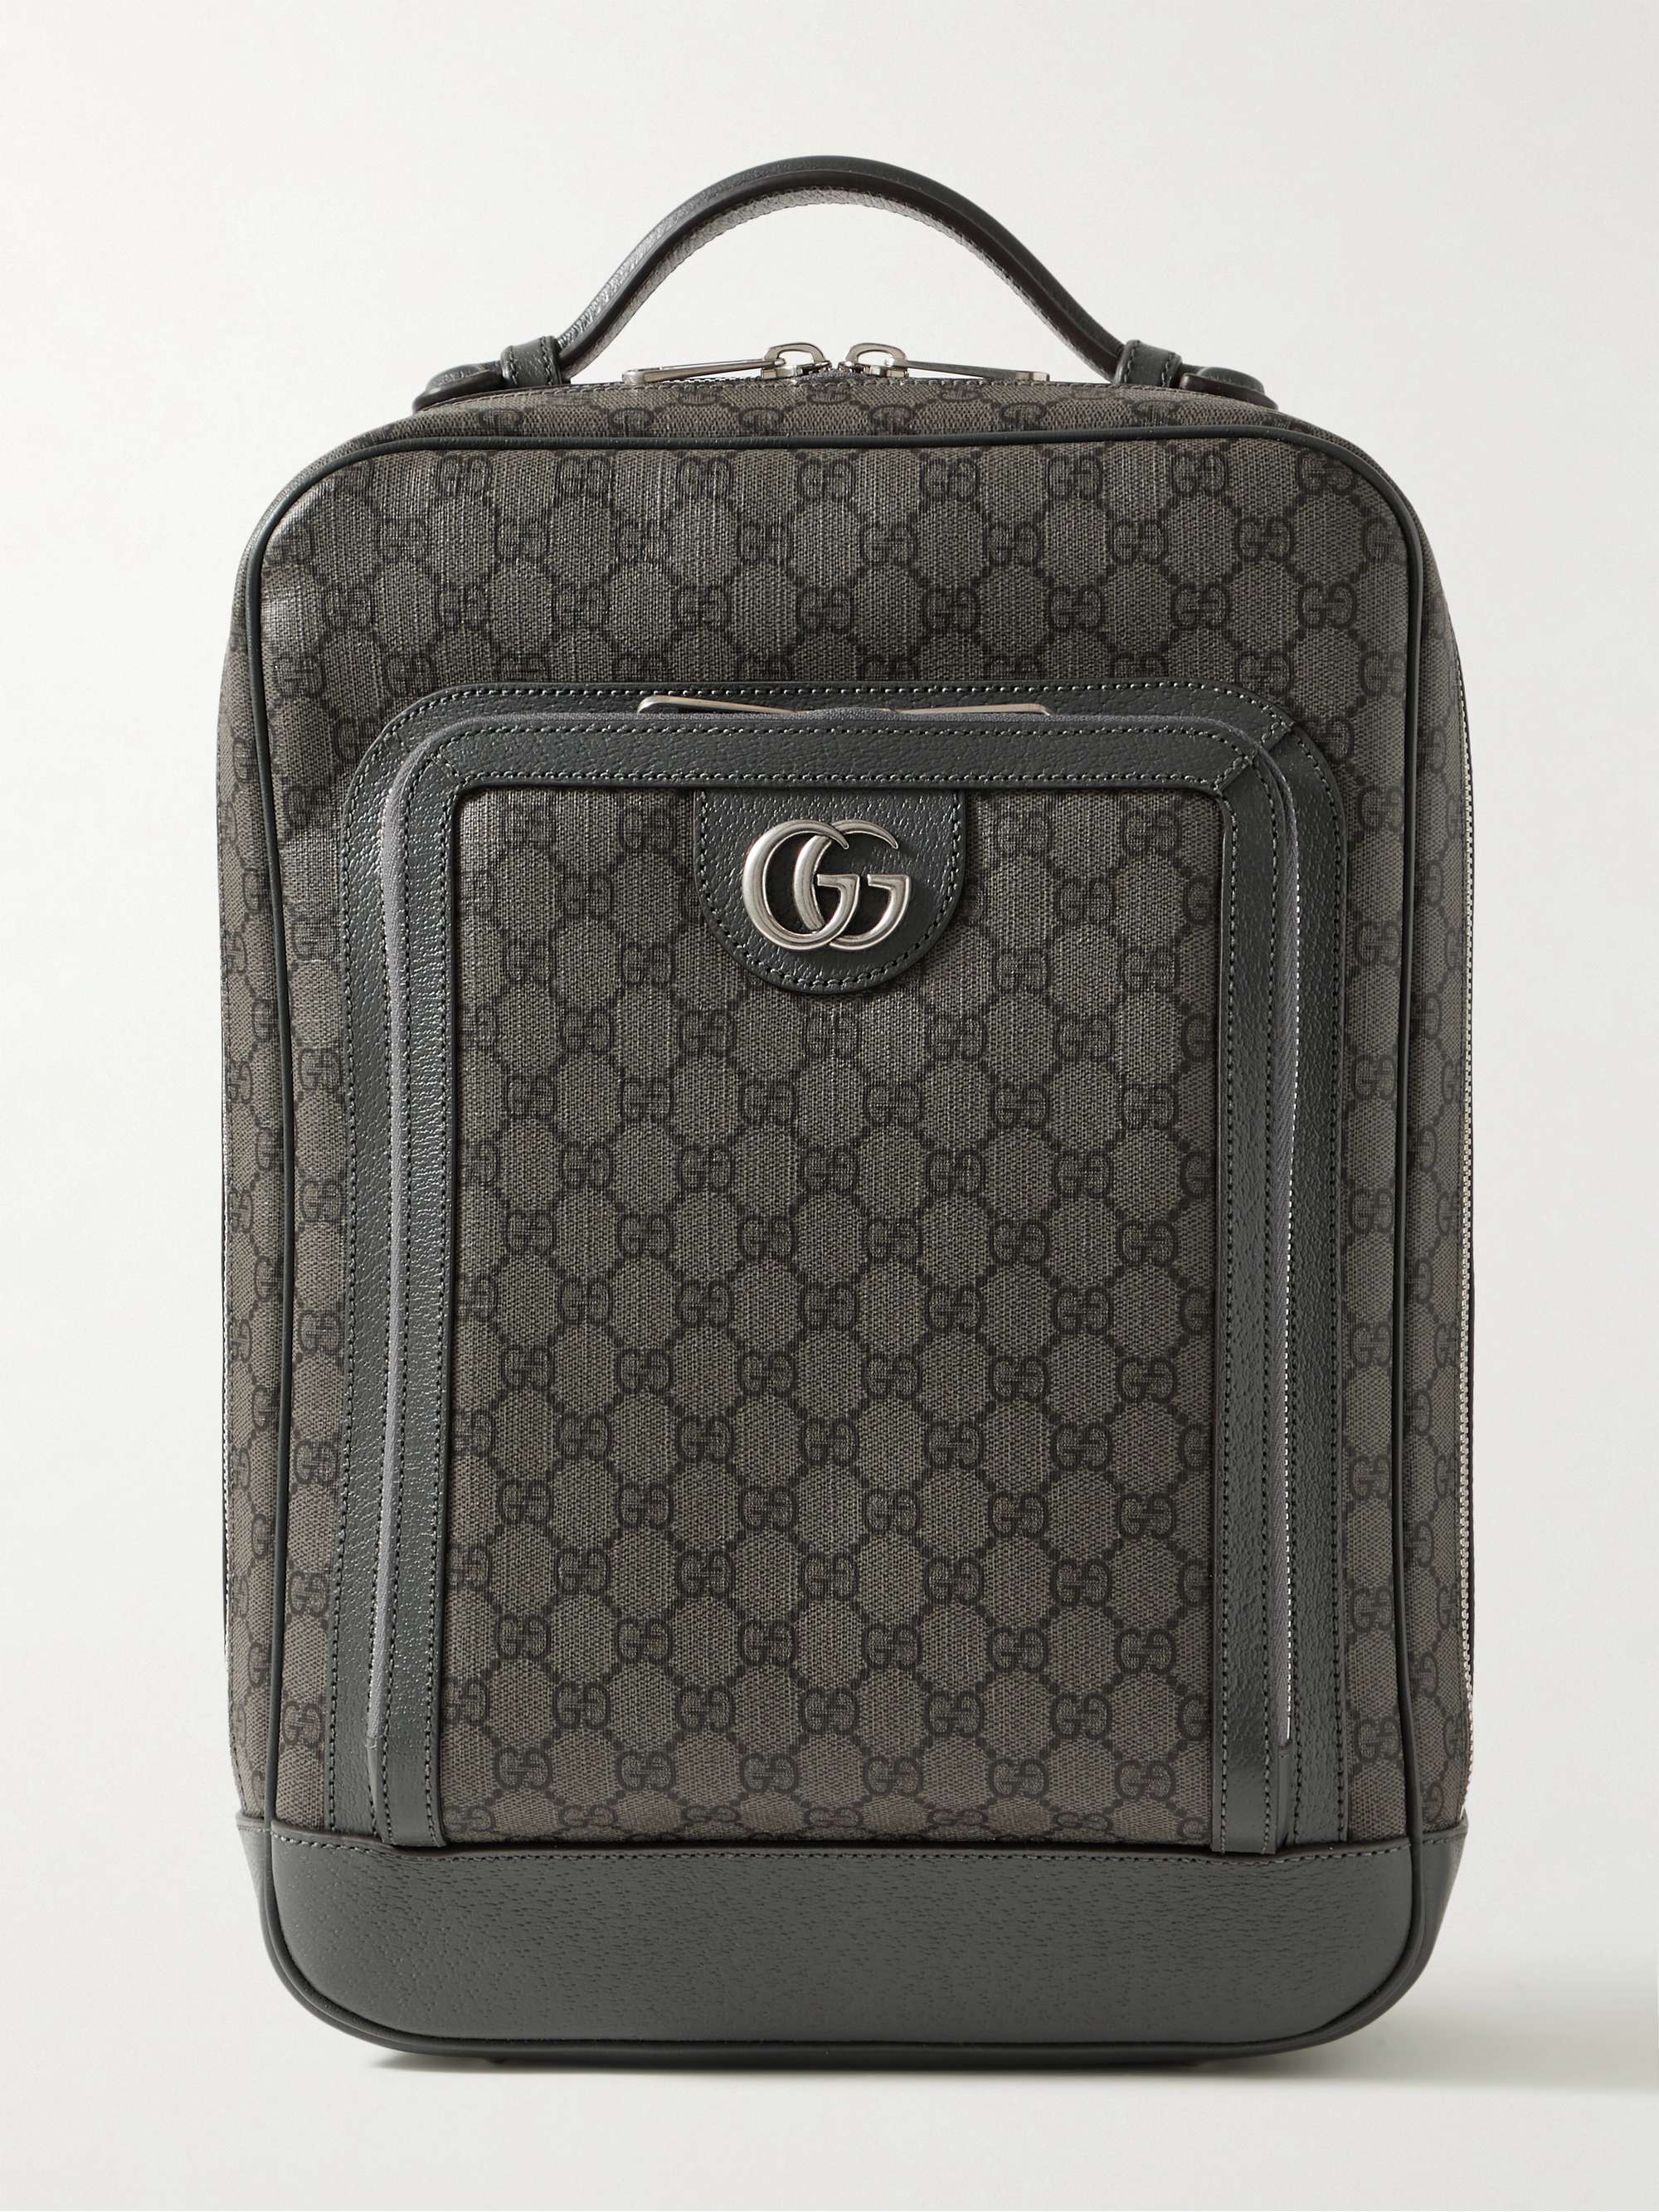 Gucci - Monogrammed Coated-Canvas and Leather Backpack - Black Gucci